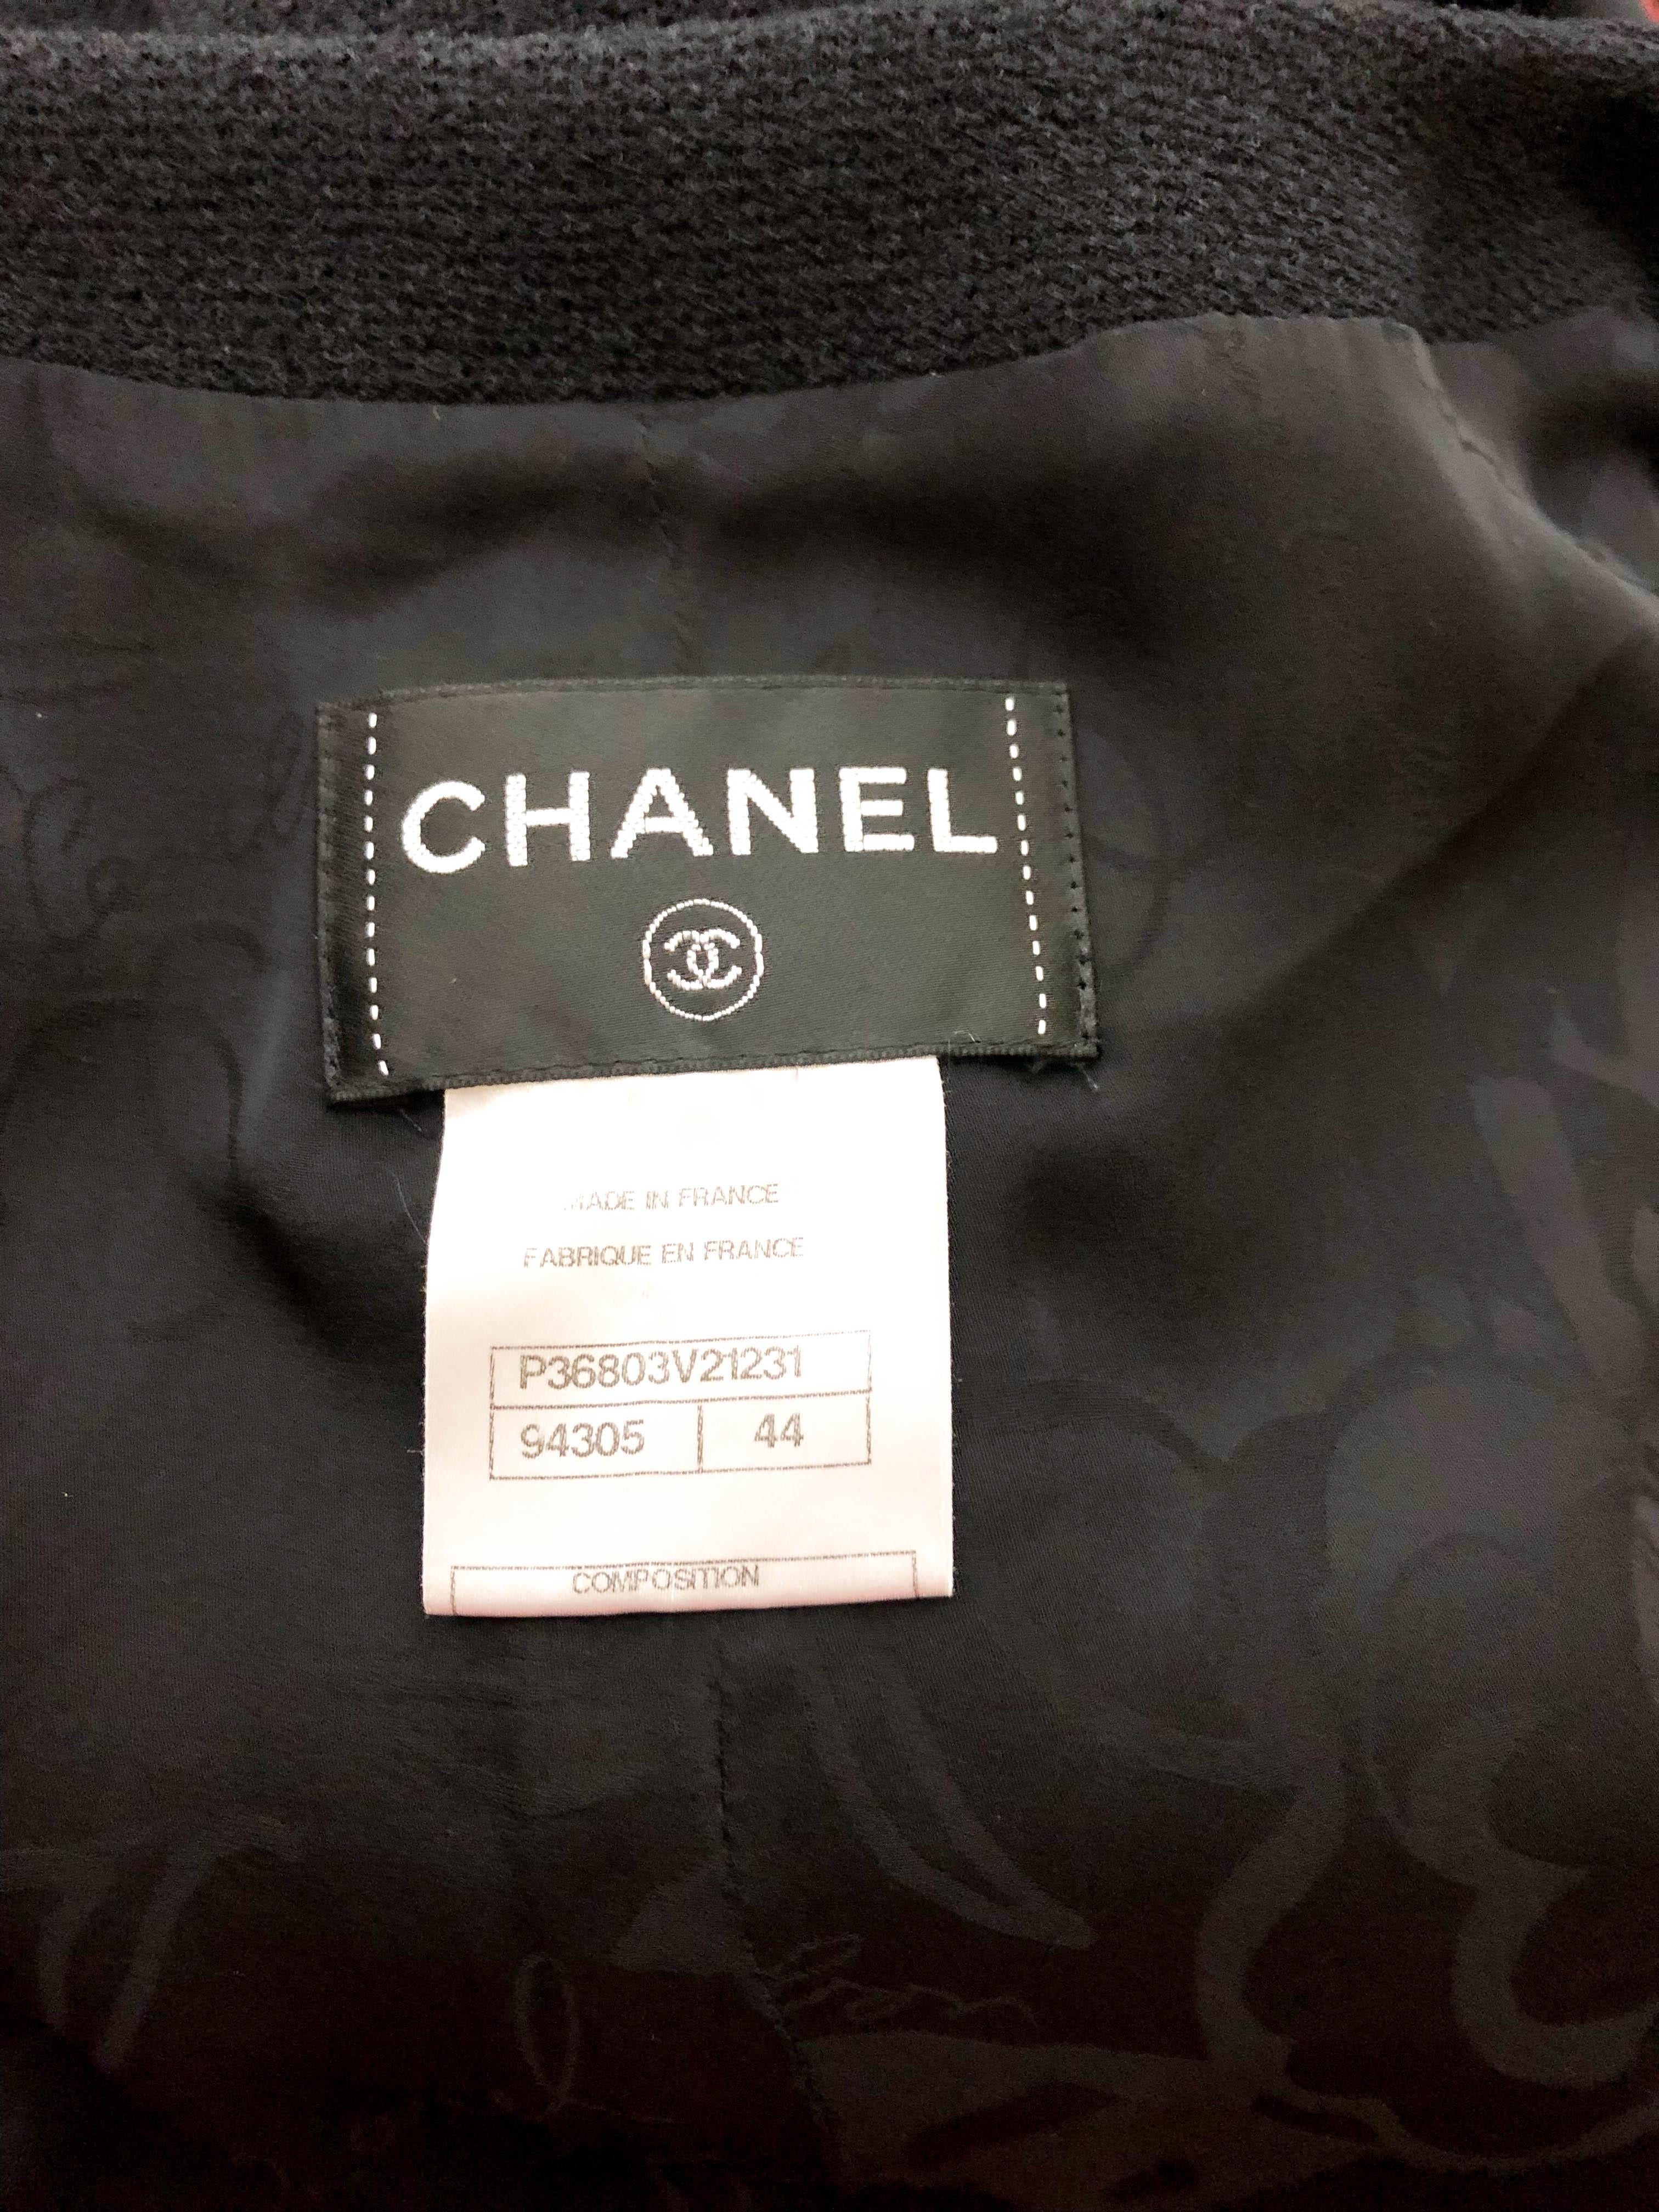 2009 Chanel Runway Look Black Wool Belted Dress / Coat (Large Size) For Sale 7